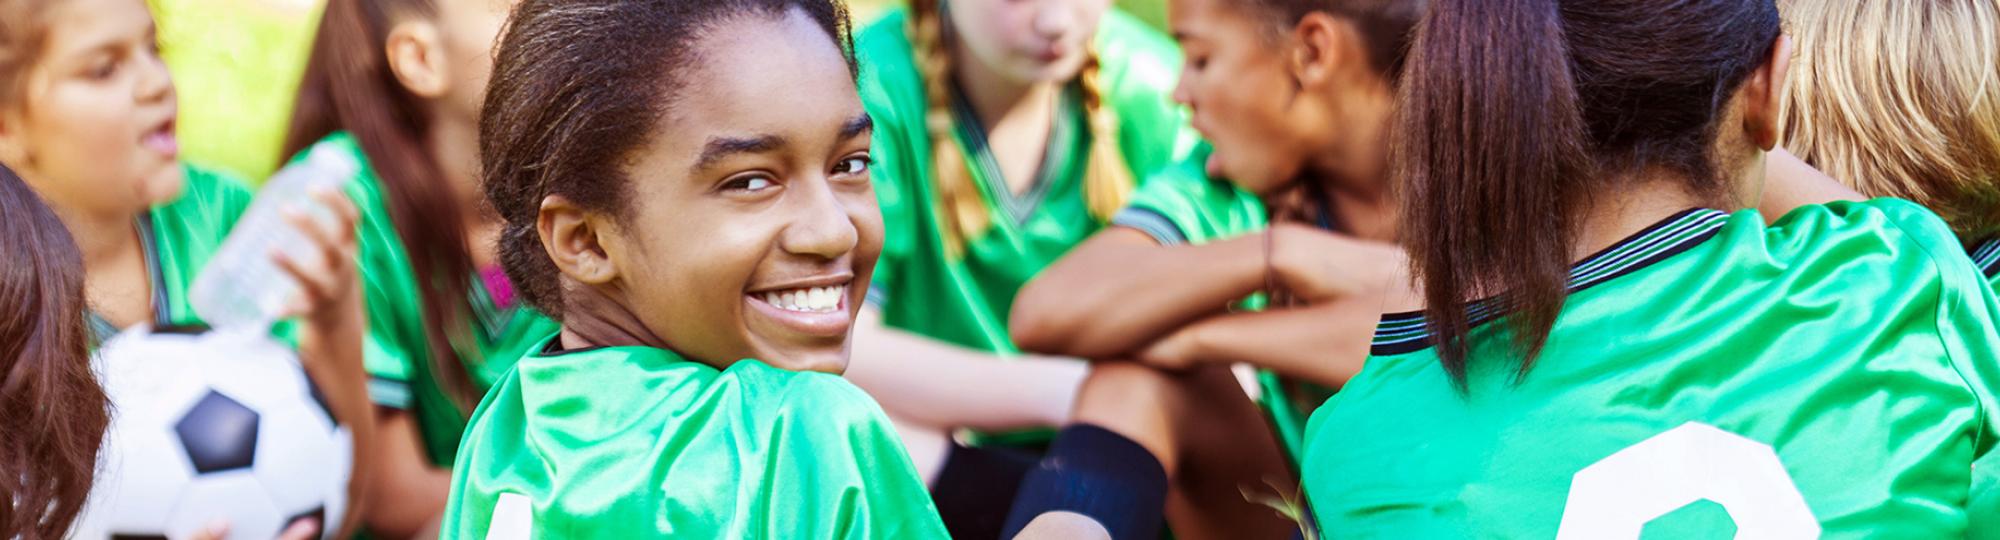 Smiling girl in huddle with soccer team wearing bright green shirts